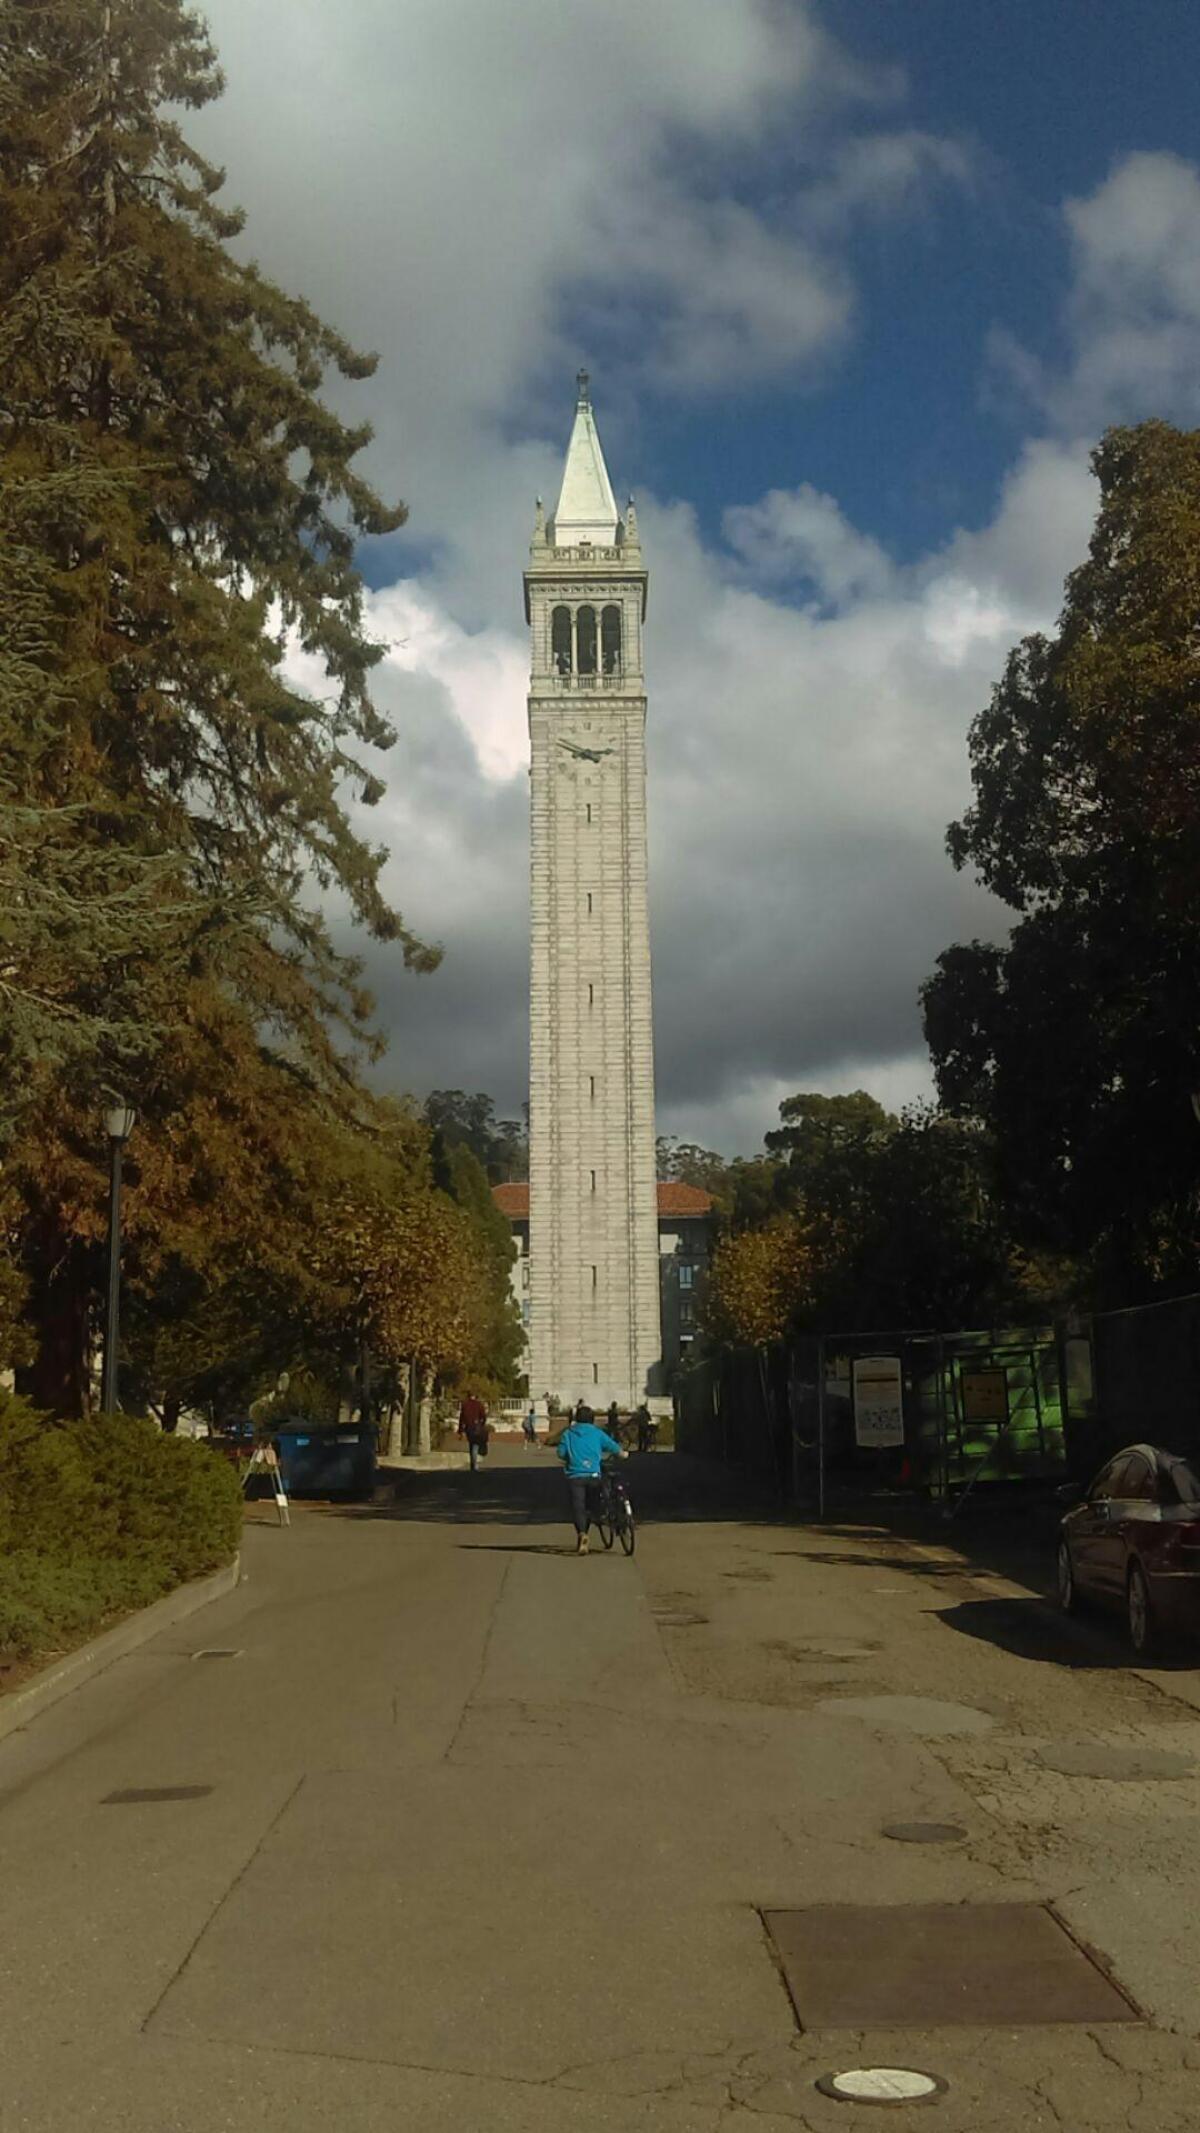 One of the big landmarks of UC Berkeley, according to our tour guide.